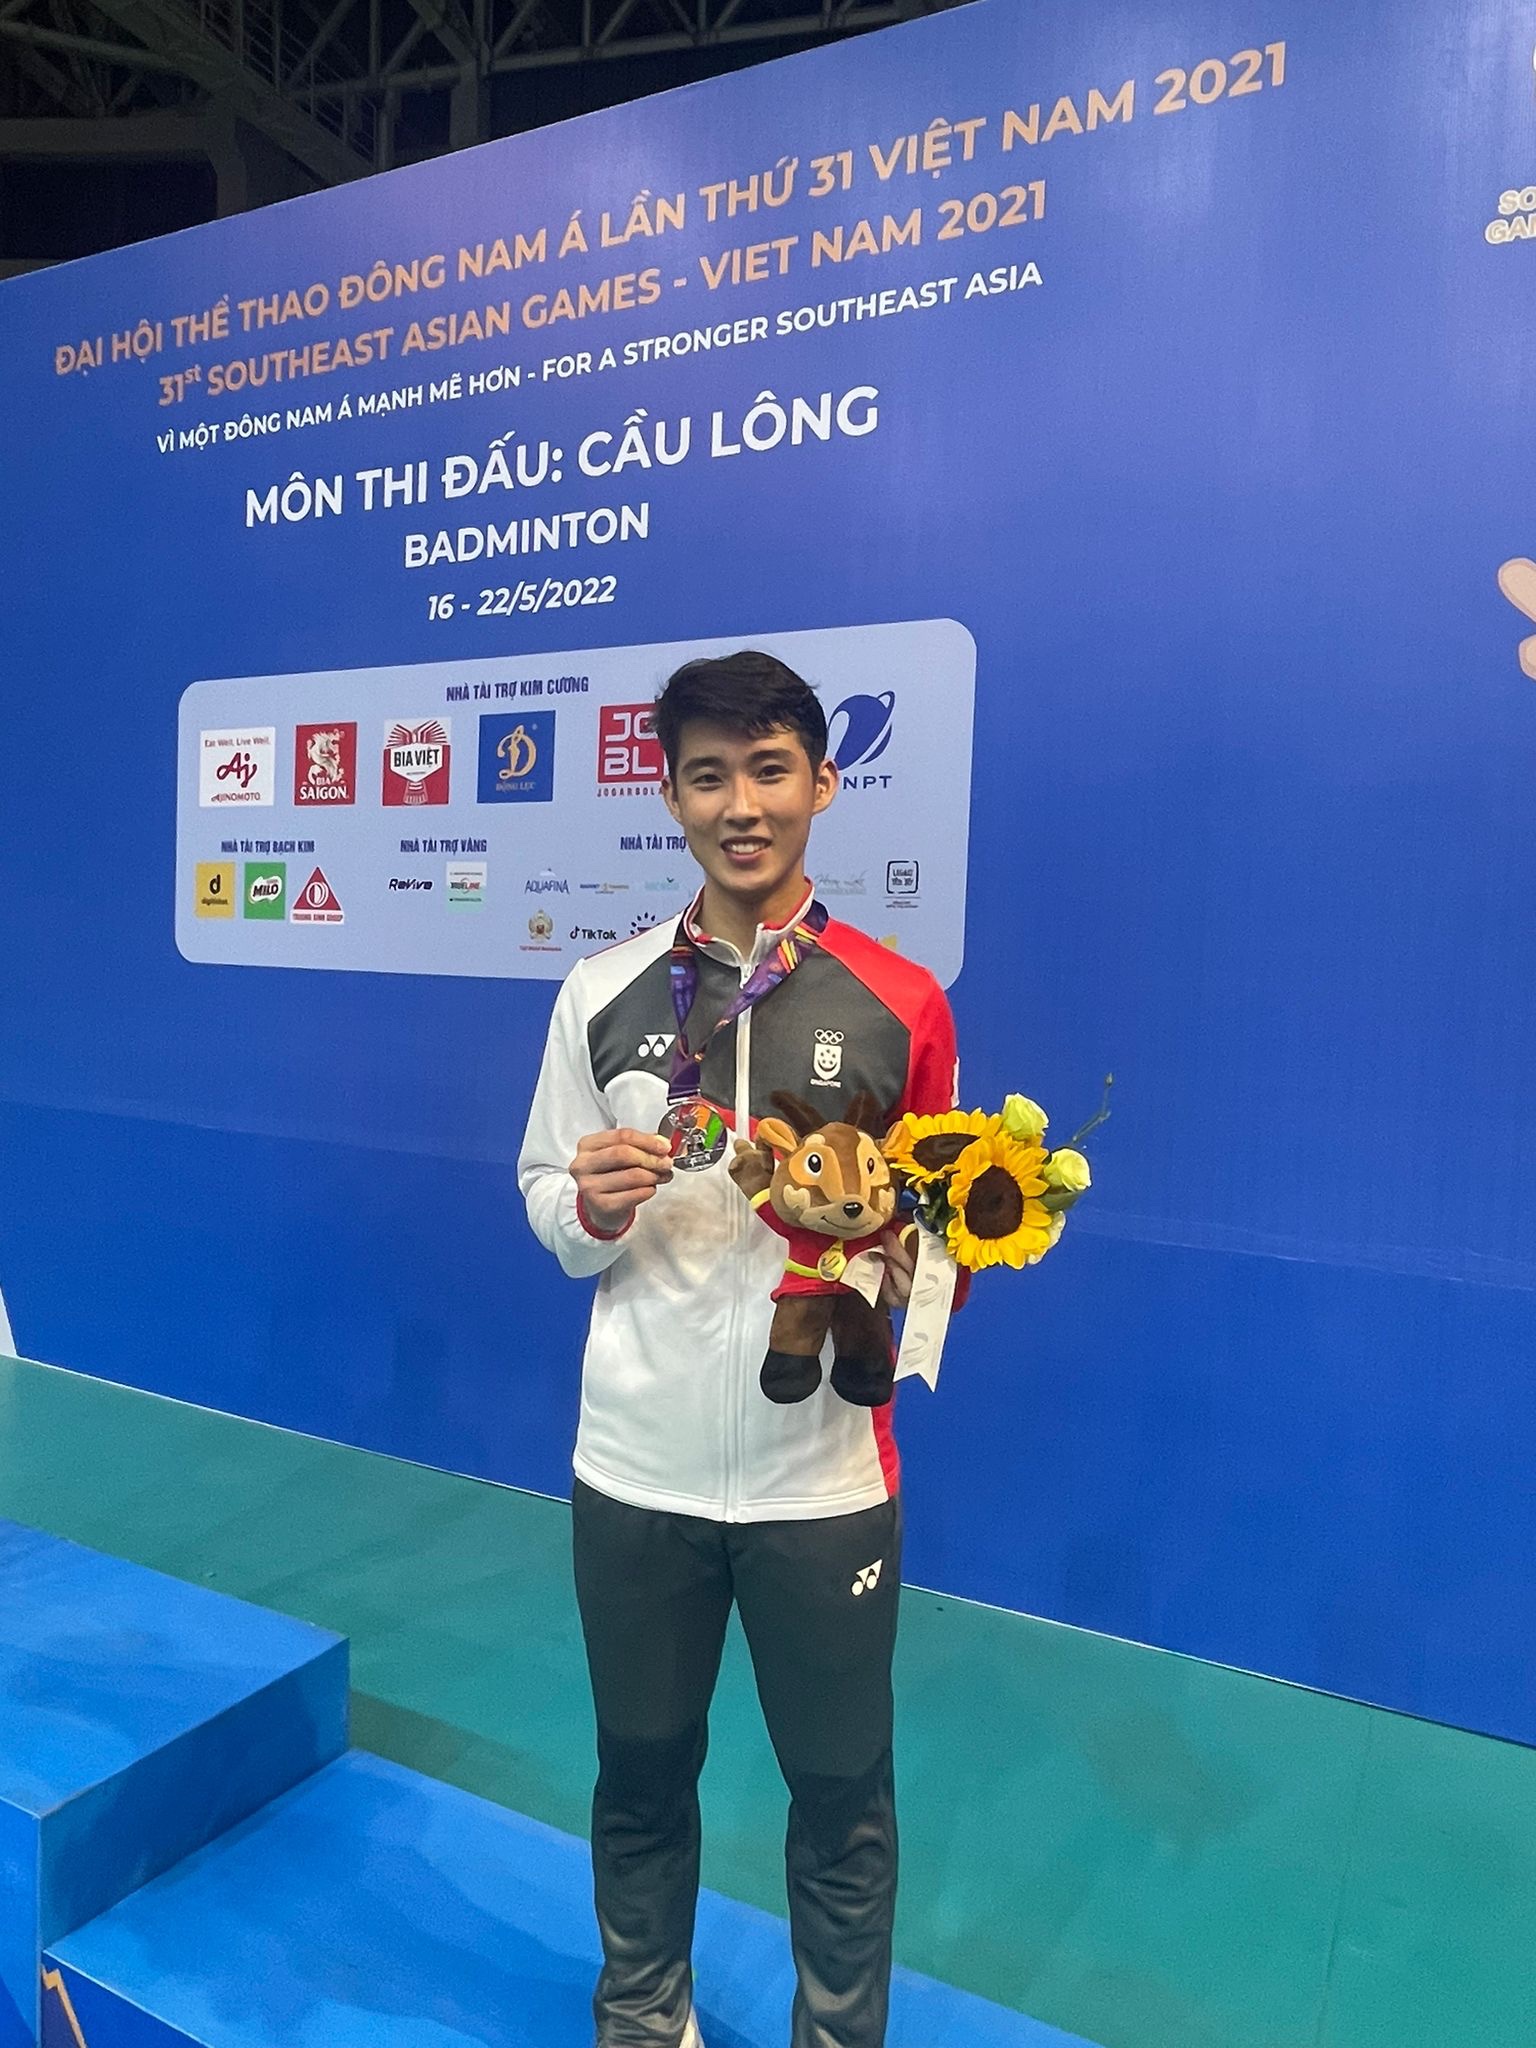 Loh Kean Yew Wins Runner-Up At SEA Games Badminton Final, Makes Spore Proud Once Again